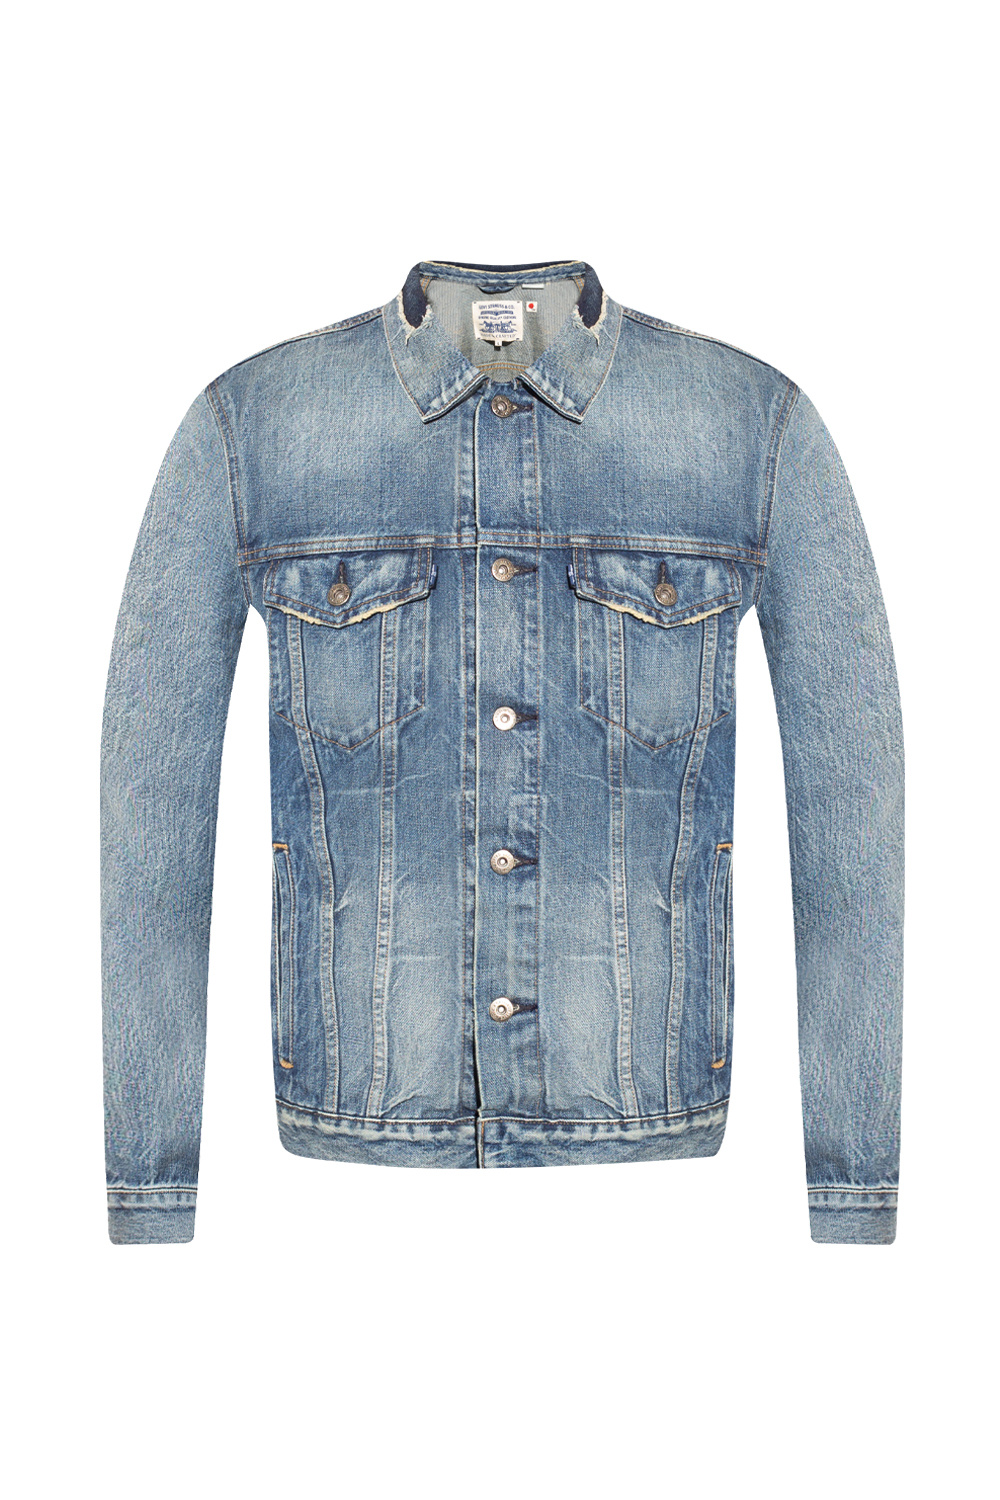 Denim jacket 'Made & Crafted ®' collection Levi's - Rebecca Vallance  round-neck tweed jacket - IetpShops Nepal